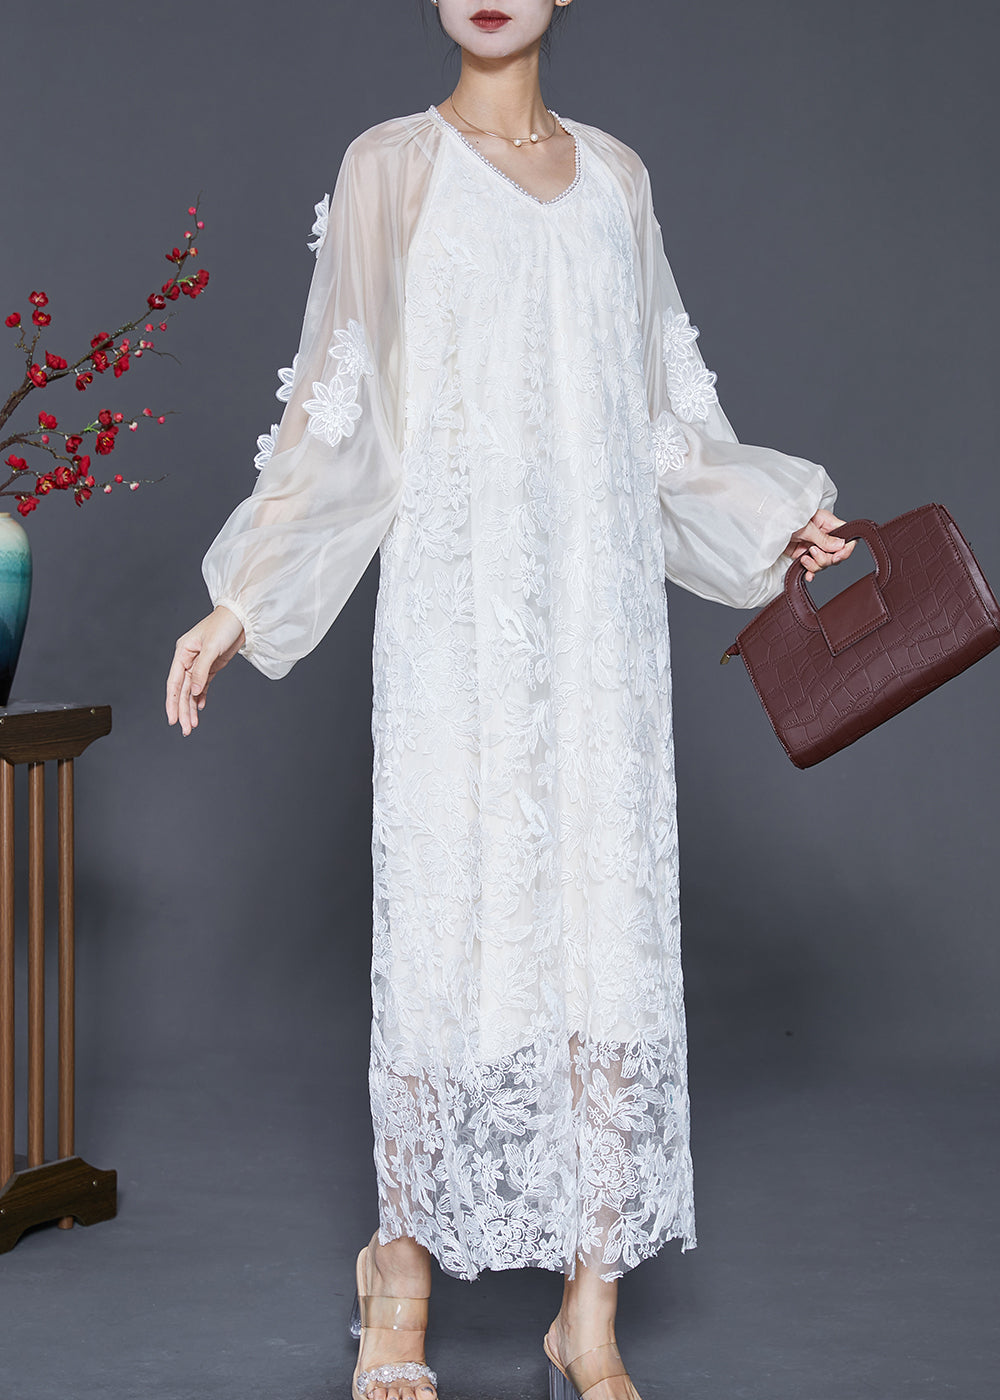 French White Stereoscopic Floral Lace Long Dresses Fall